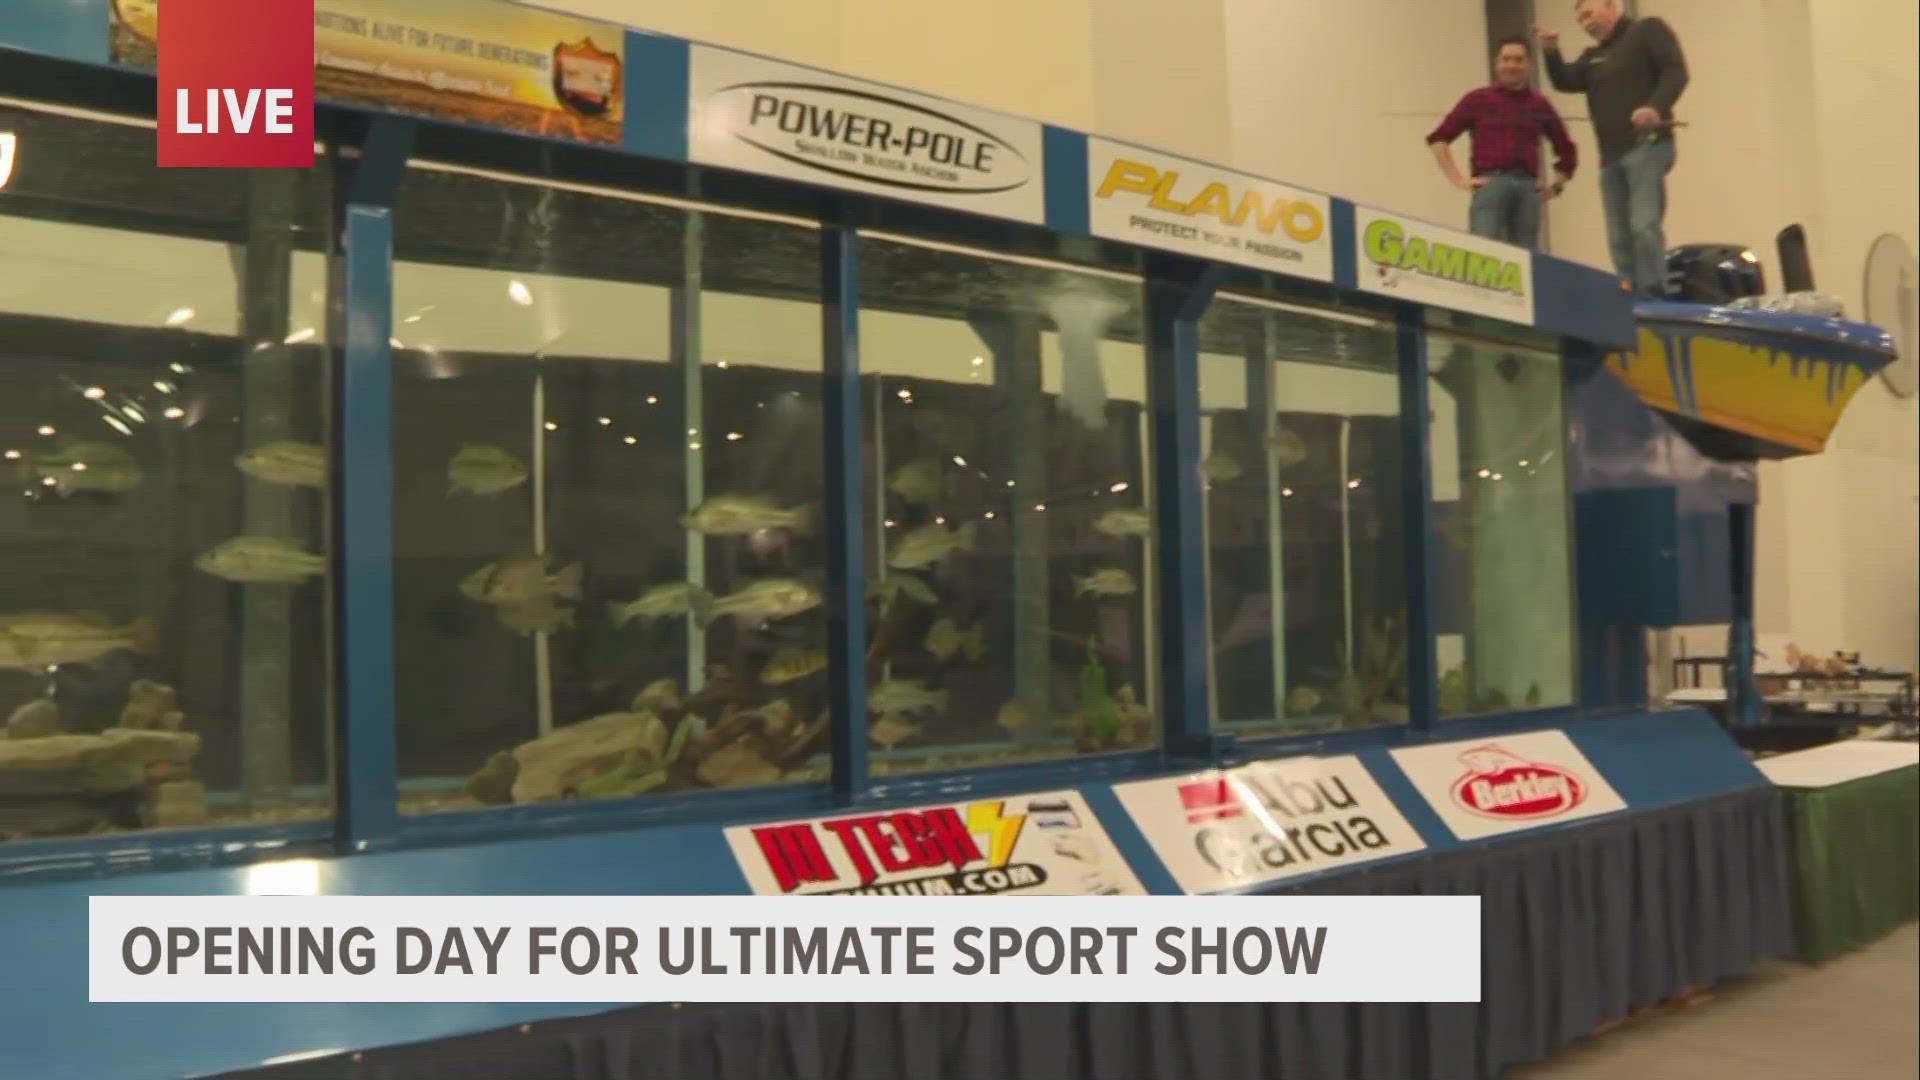 From fishing to woodworking to rock climbing, there's something for everyone at the Ultimate Sport Show.